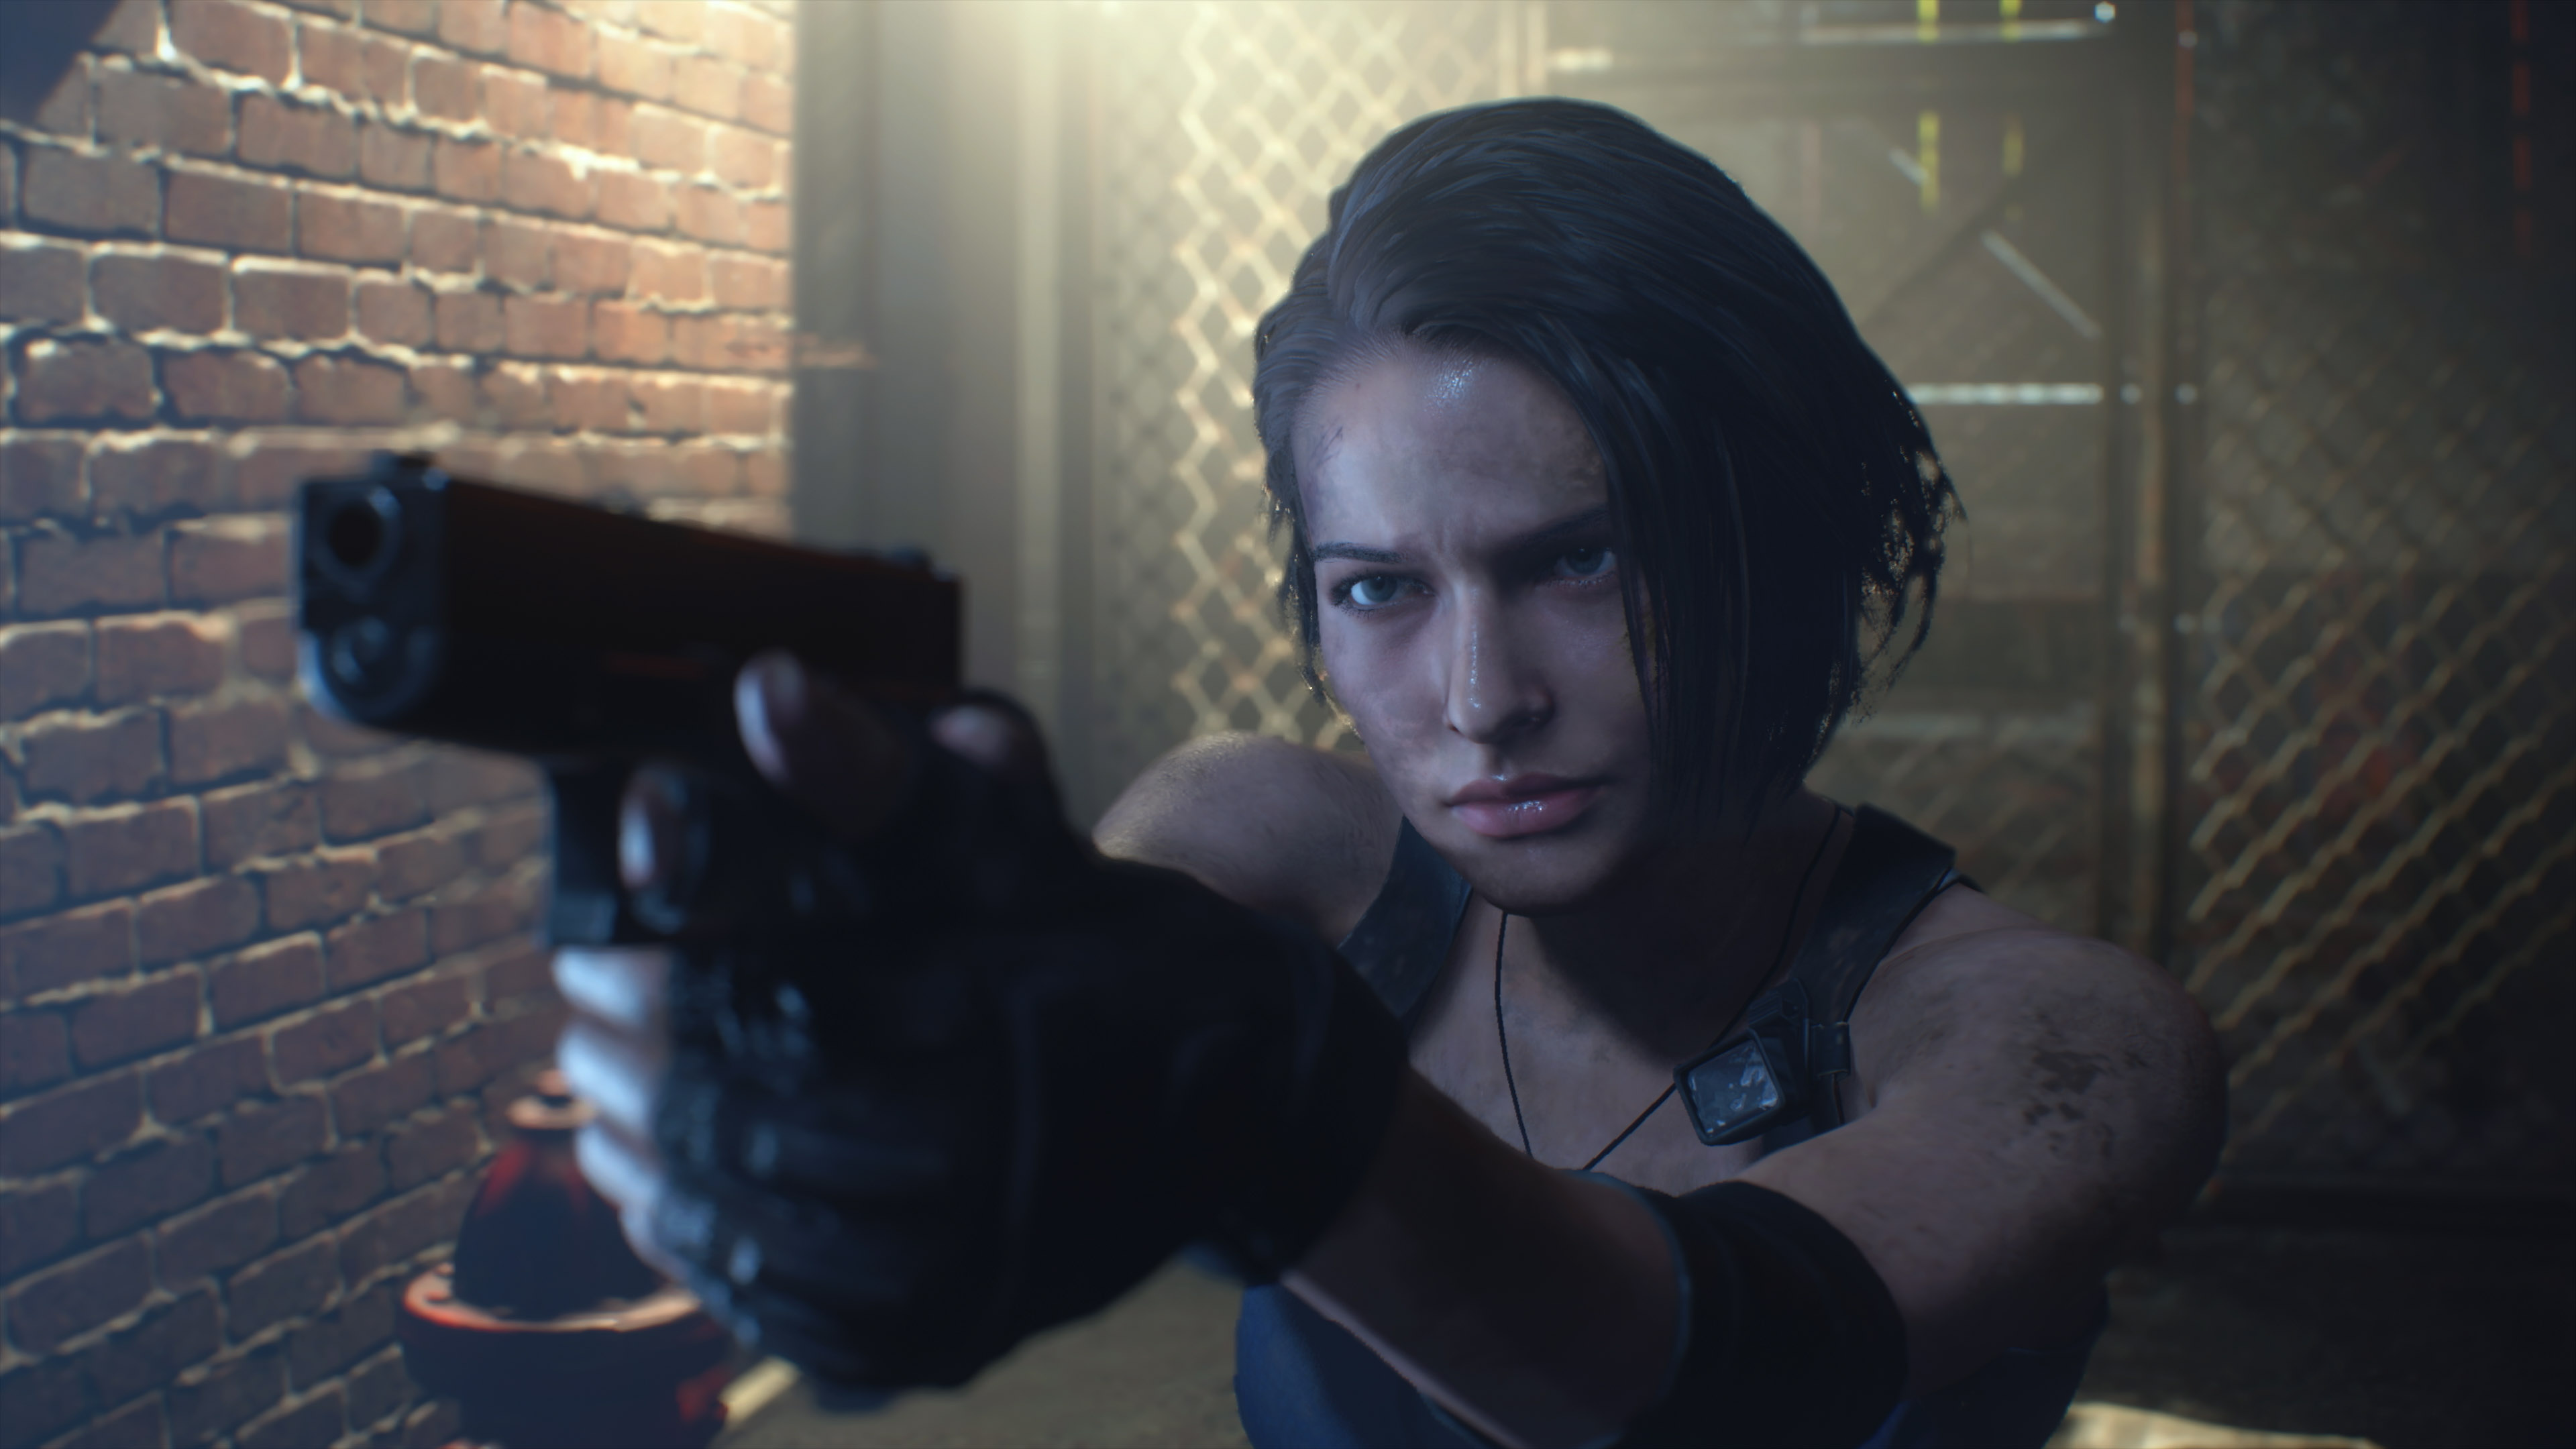 Download Jill Valentine wallpapers for mobile phone, free Jill Valentine  HD pictures